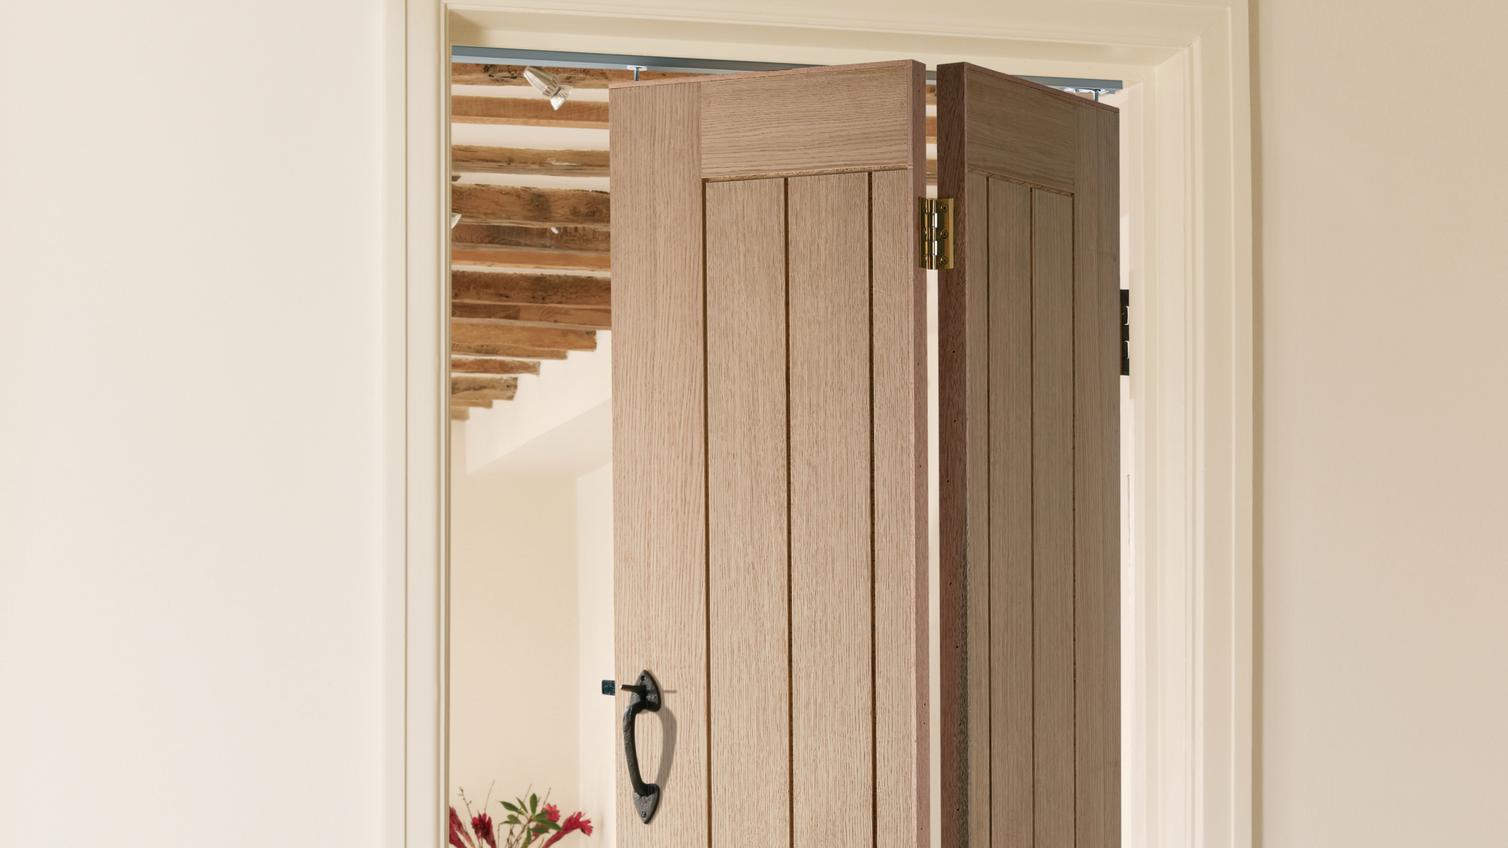 Holdenby oak bi-fold door, fitted in a white frame with a black catch-style rustic handle.